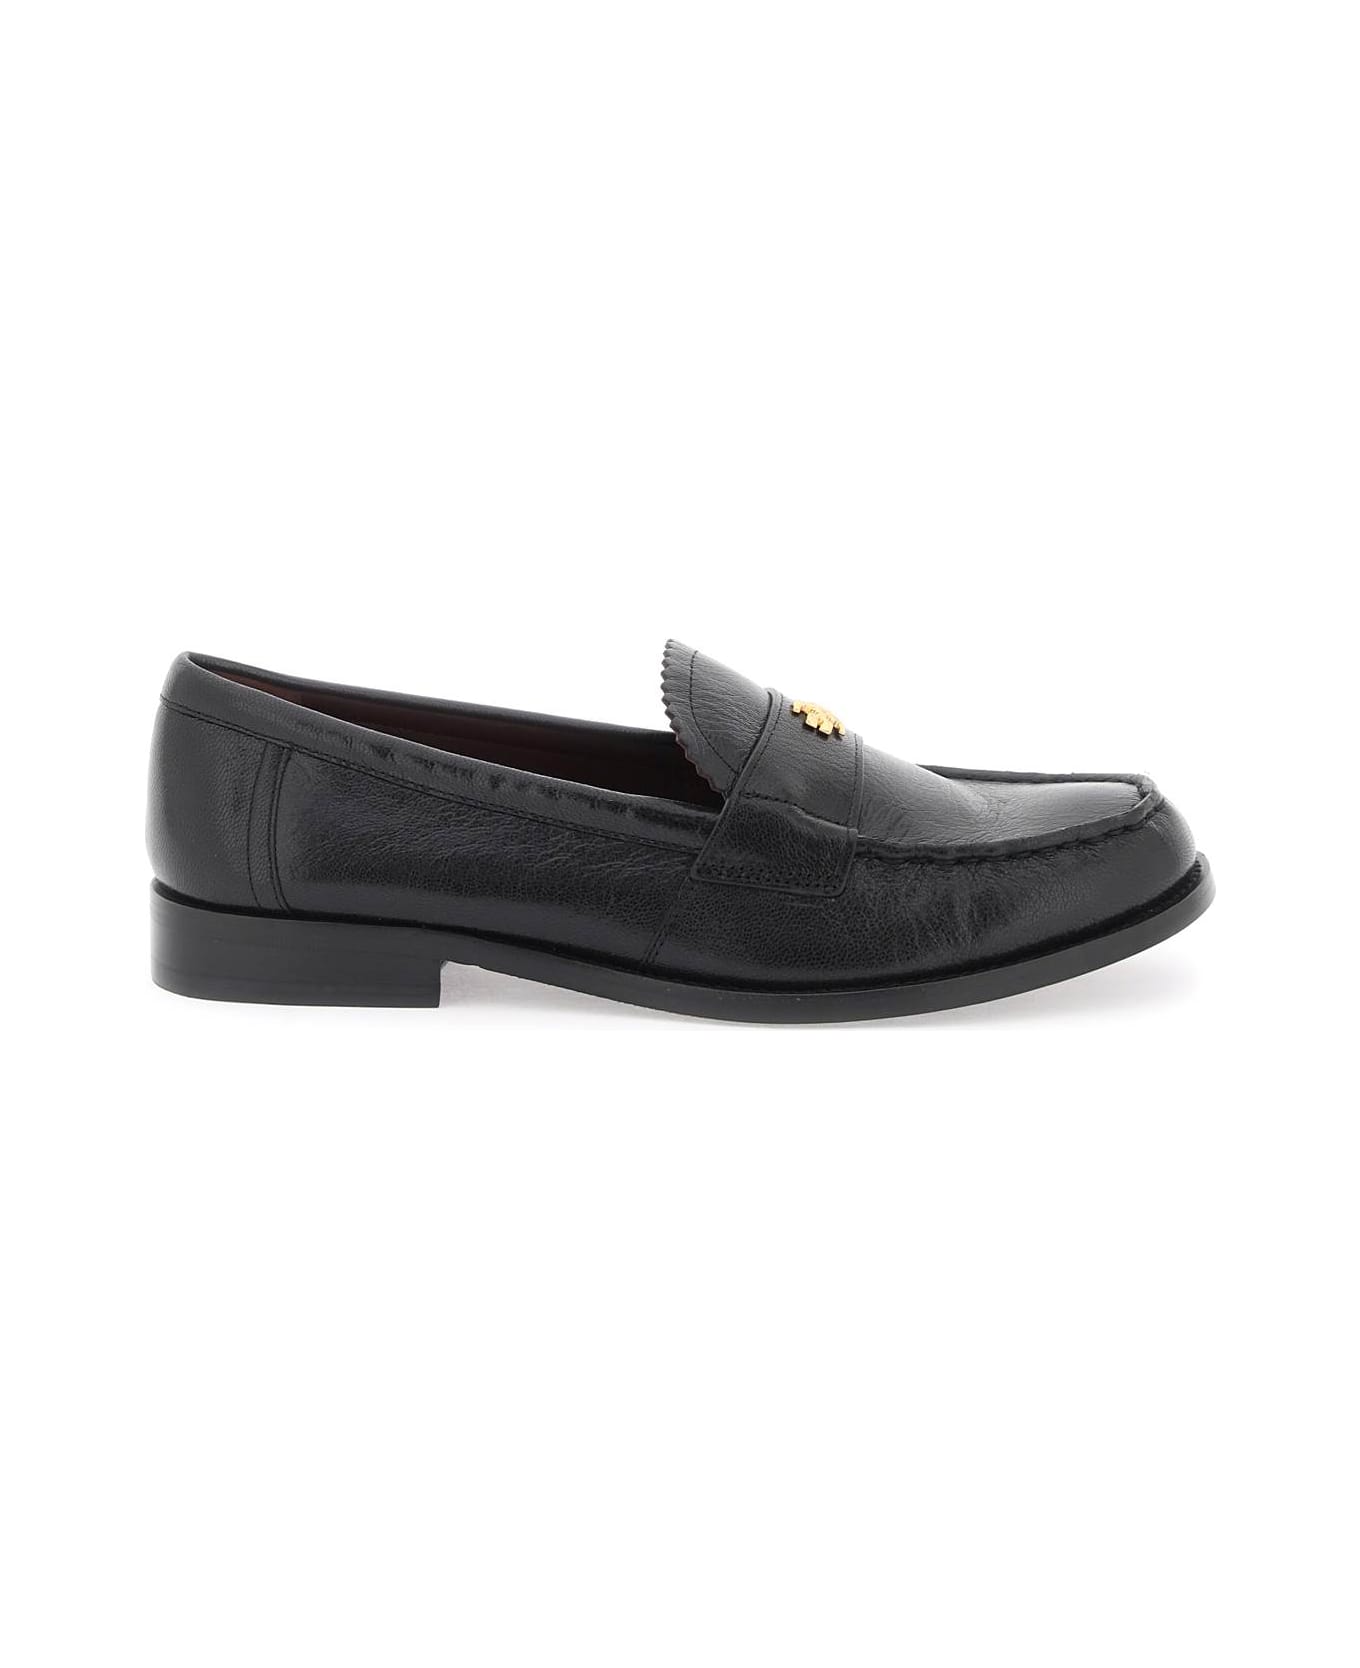 Tory Burch Perry Loafers - Black